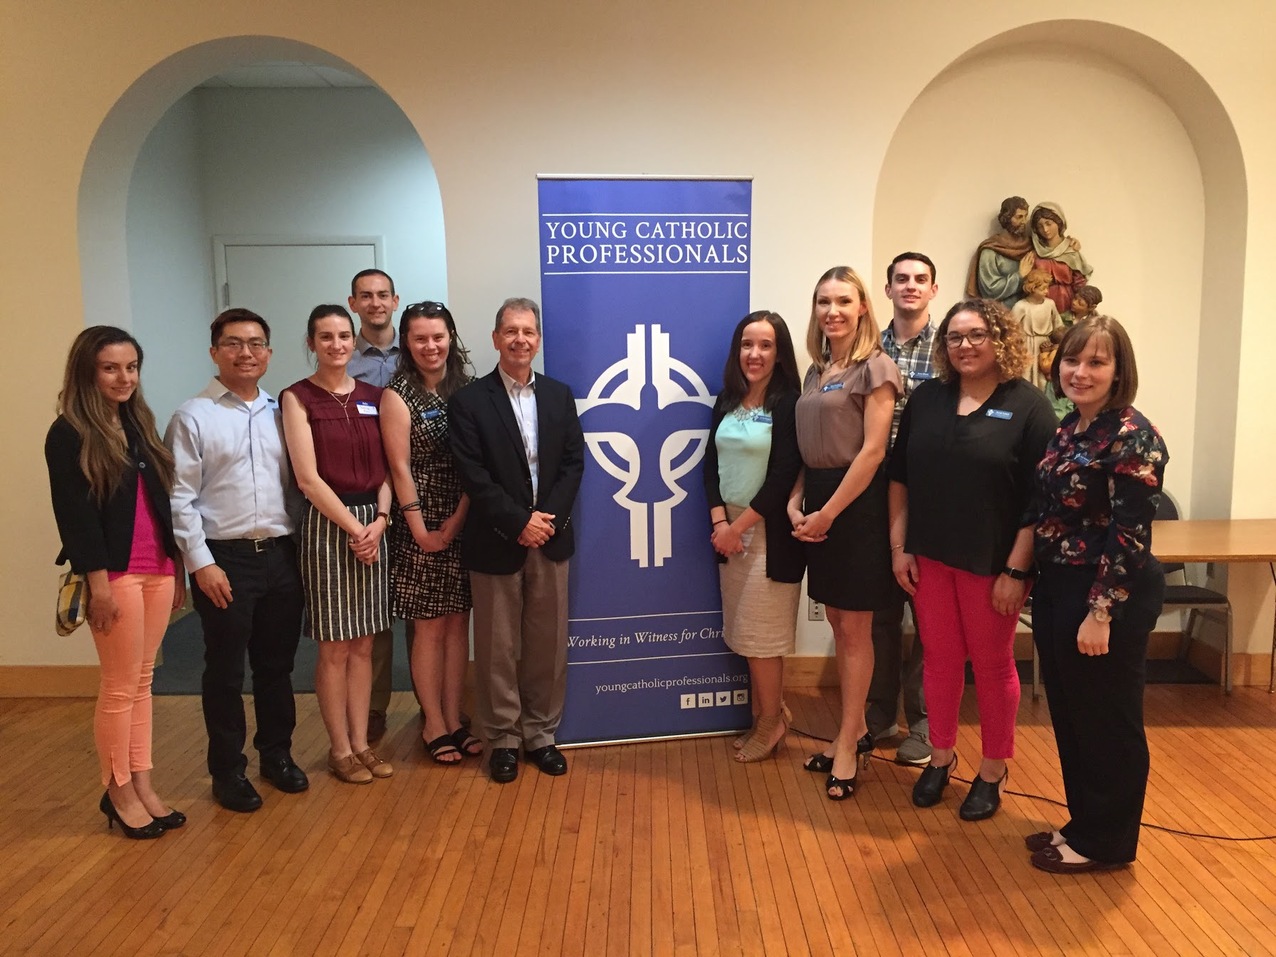 Young Catholic Professionals shows how faith fits into career objectives, leadership styles